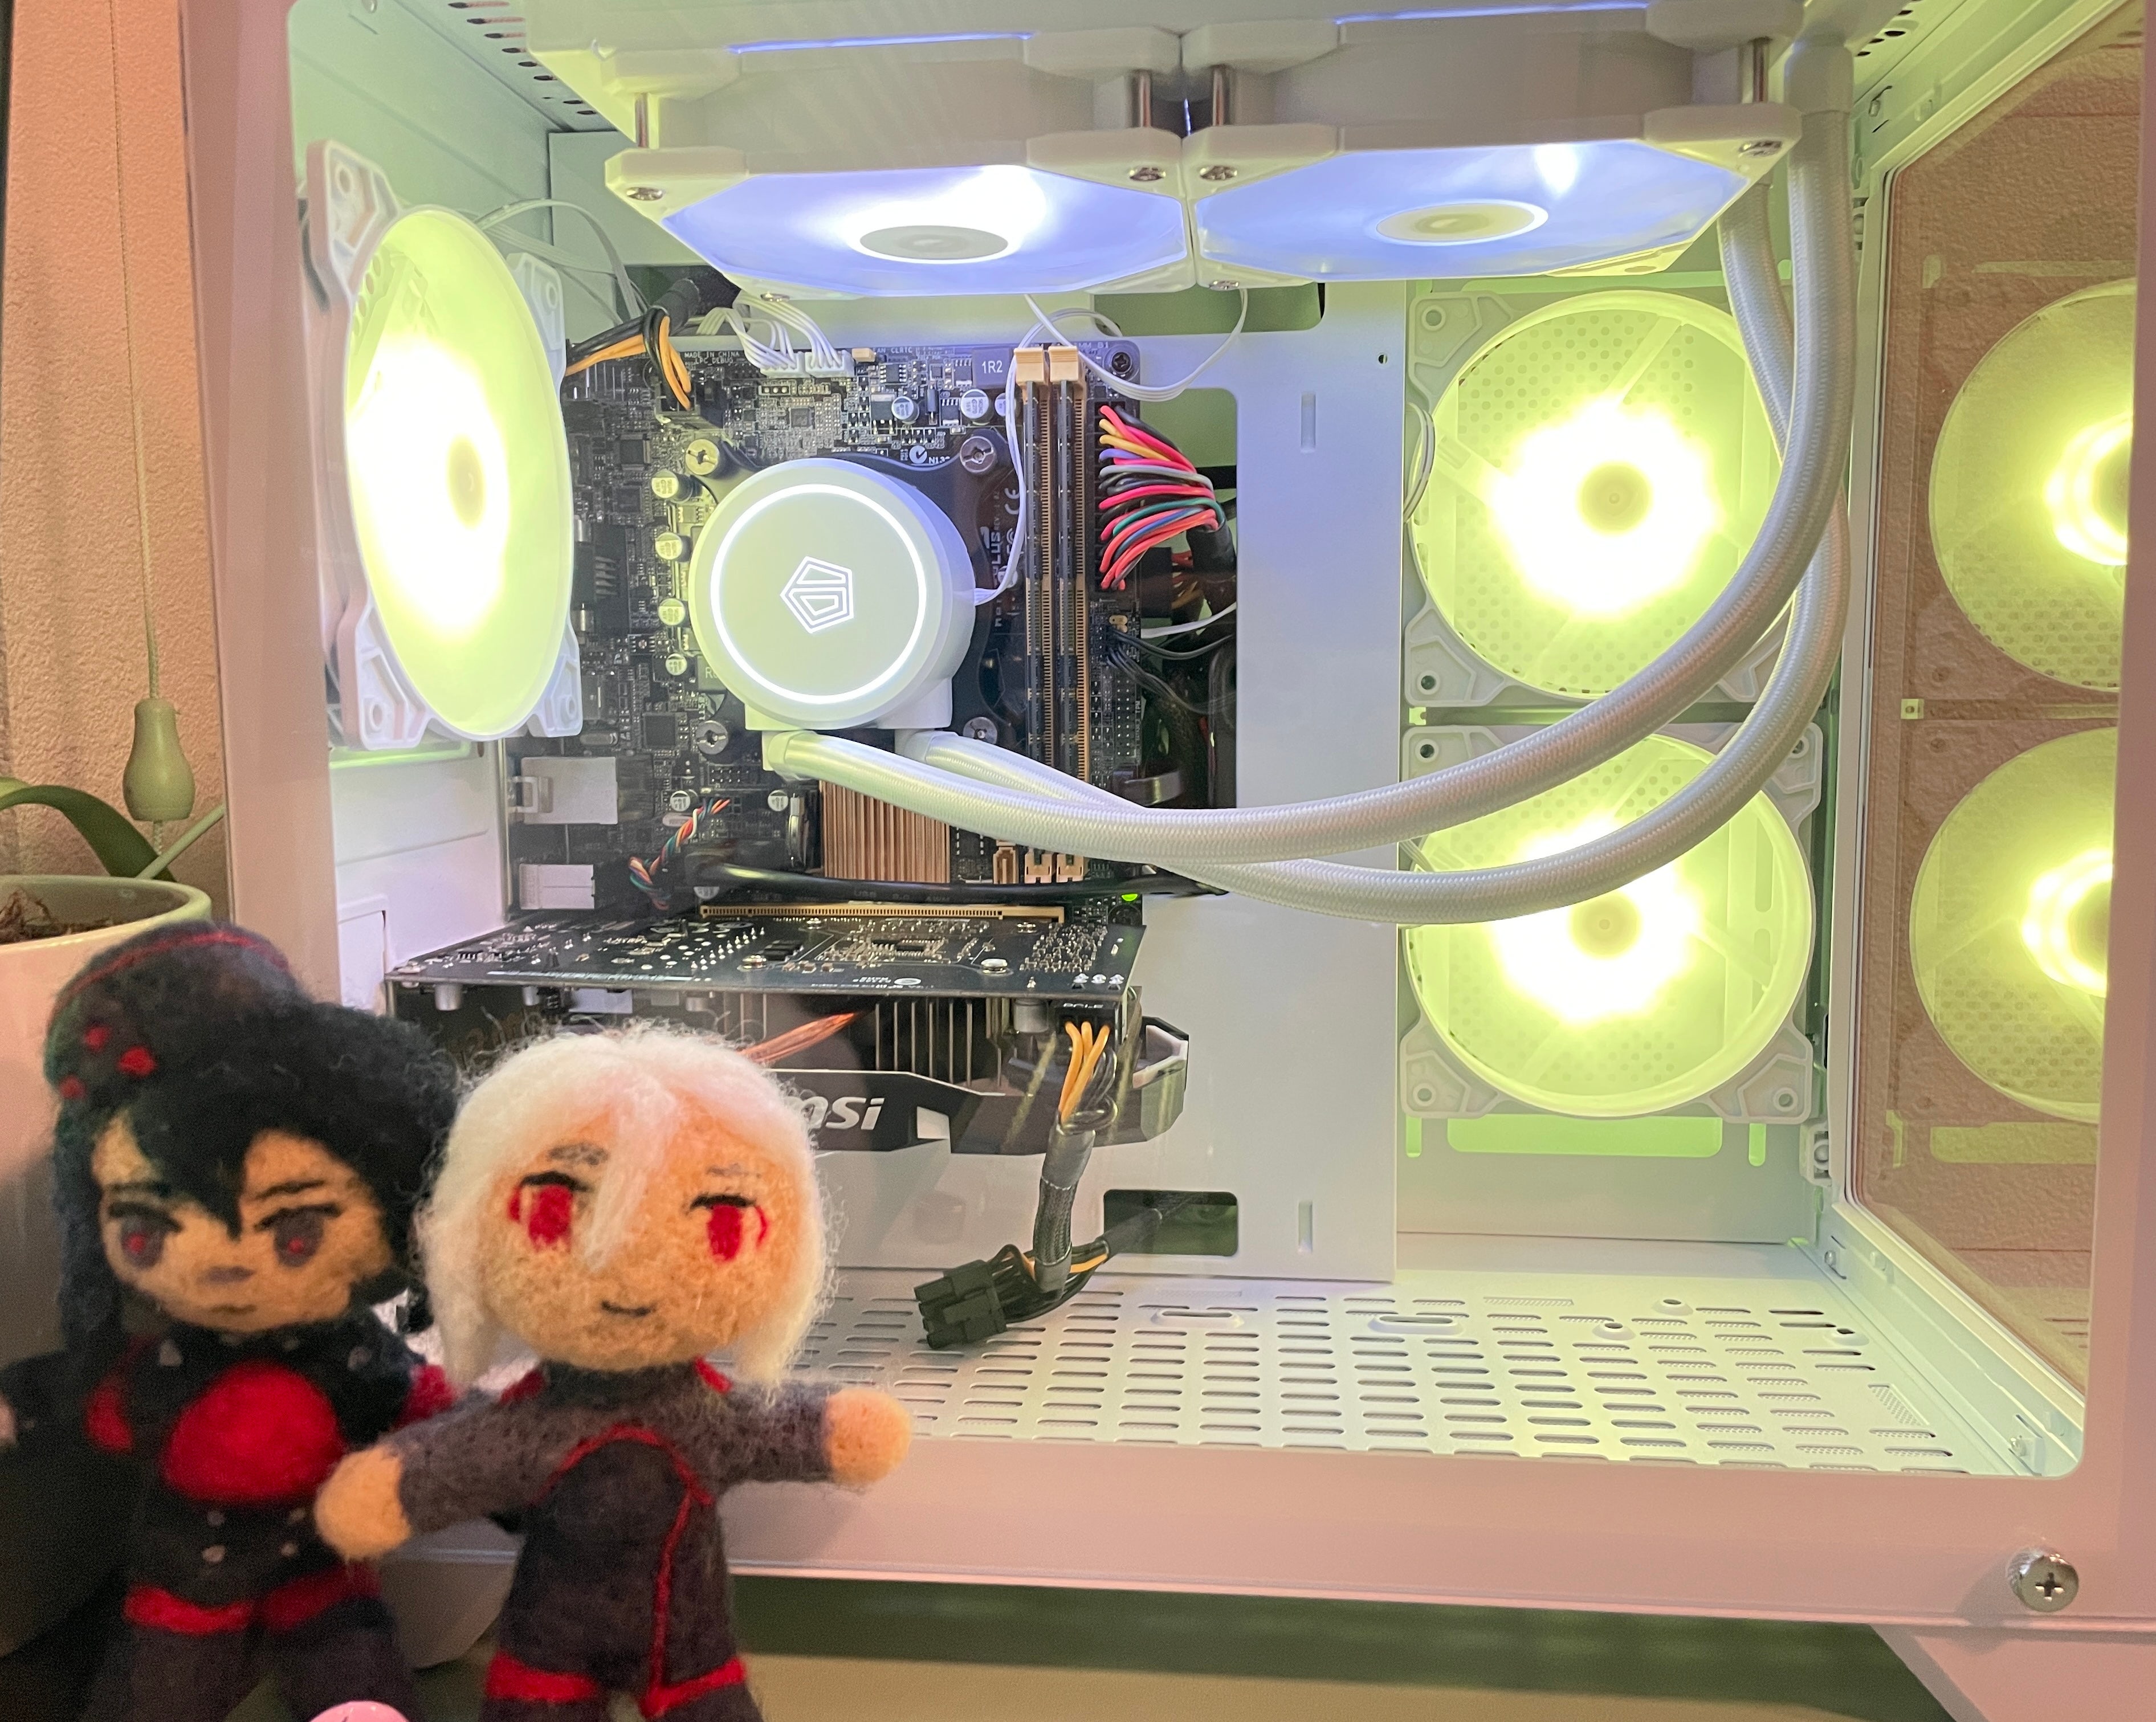 A close up of the PC. There are felted dolls of Elster and Ariane from Signalis in front of it.